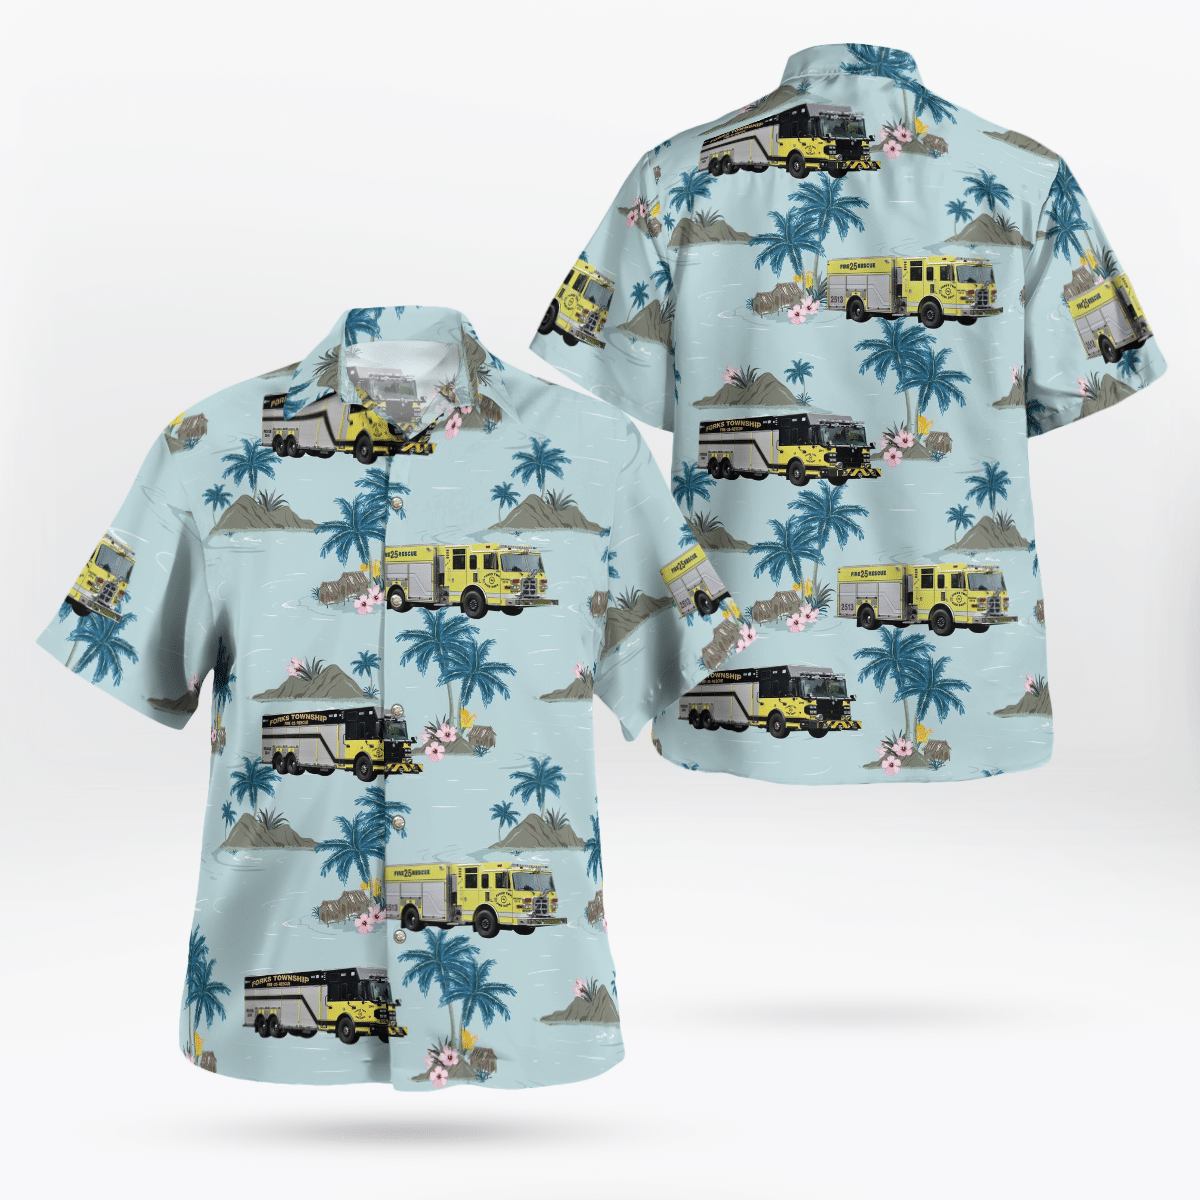 Consider getting these Hawaiian Shirt for your friends 209